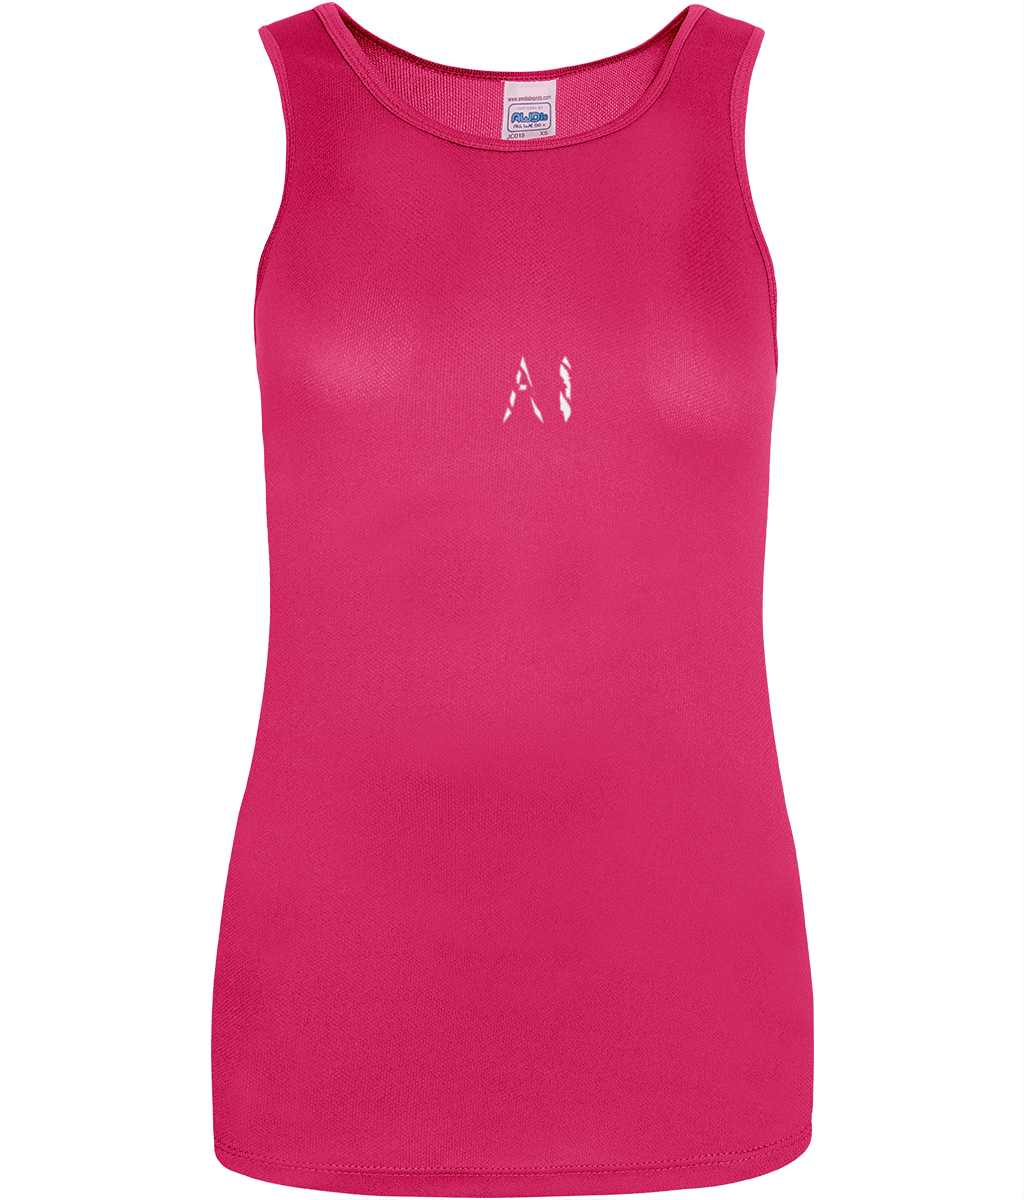 Womens pink Workout Sports Vest with white AI logo in centre chest